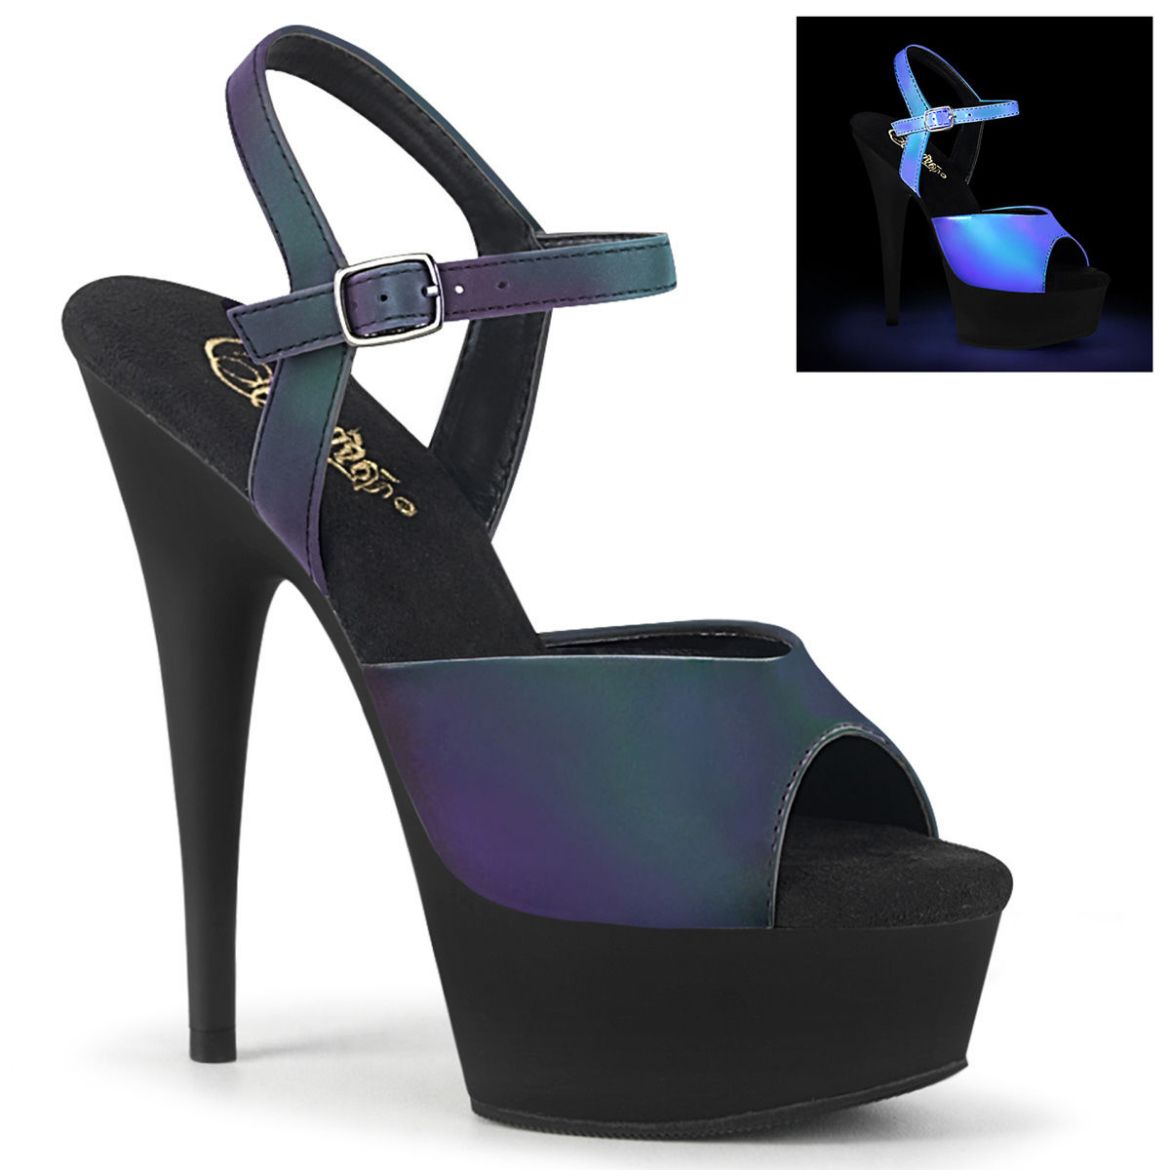 Product image of Pleaser DELIGHT-609REFL Green Multicolour Reflective/Black Matte 6 inch (15.2 cm) Heel 1 3/4 inch (4.5 cm) Platform Ankle Strap Sandal With Reflective Effect Shoes